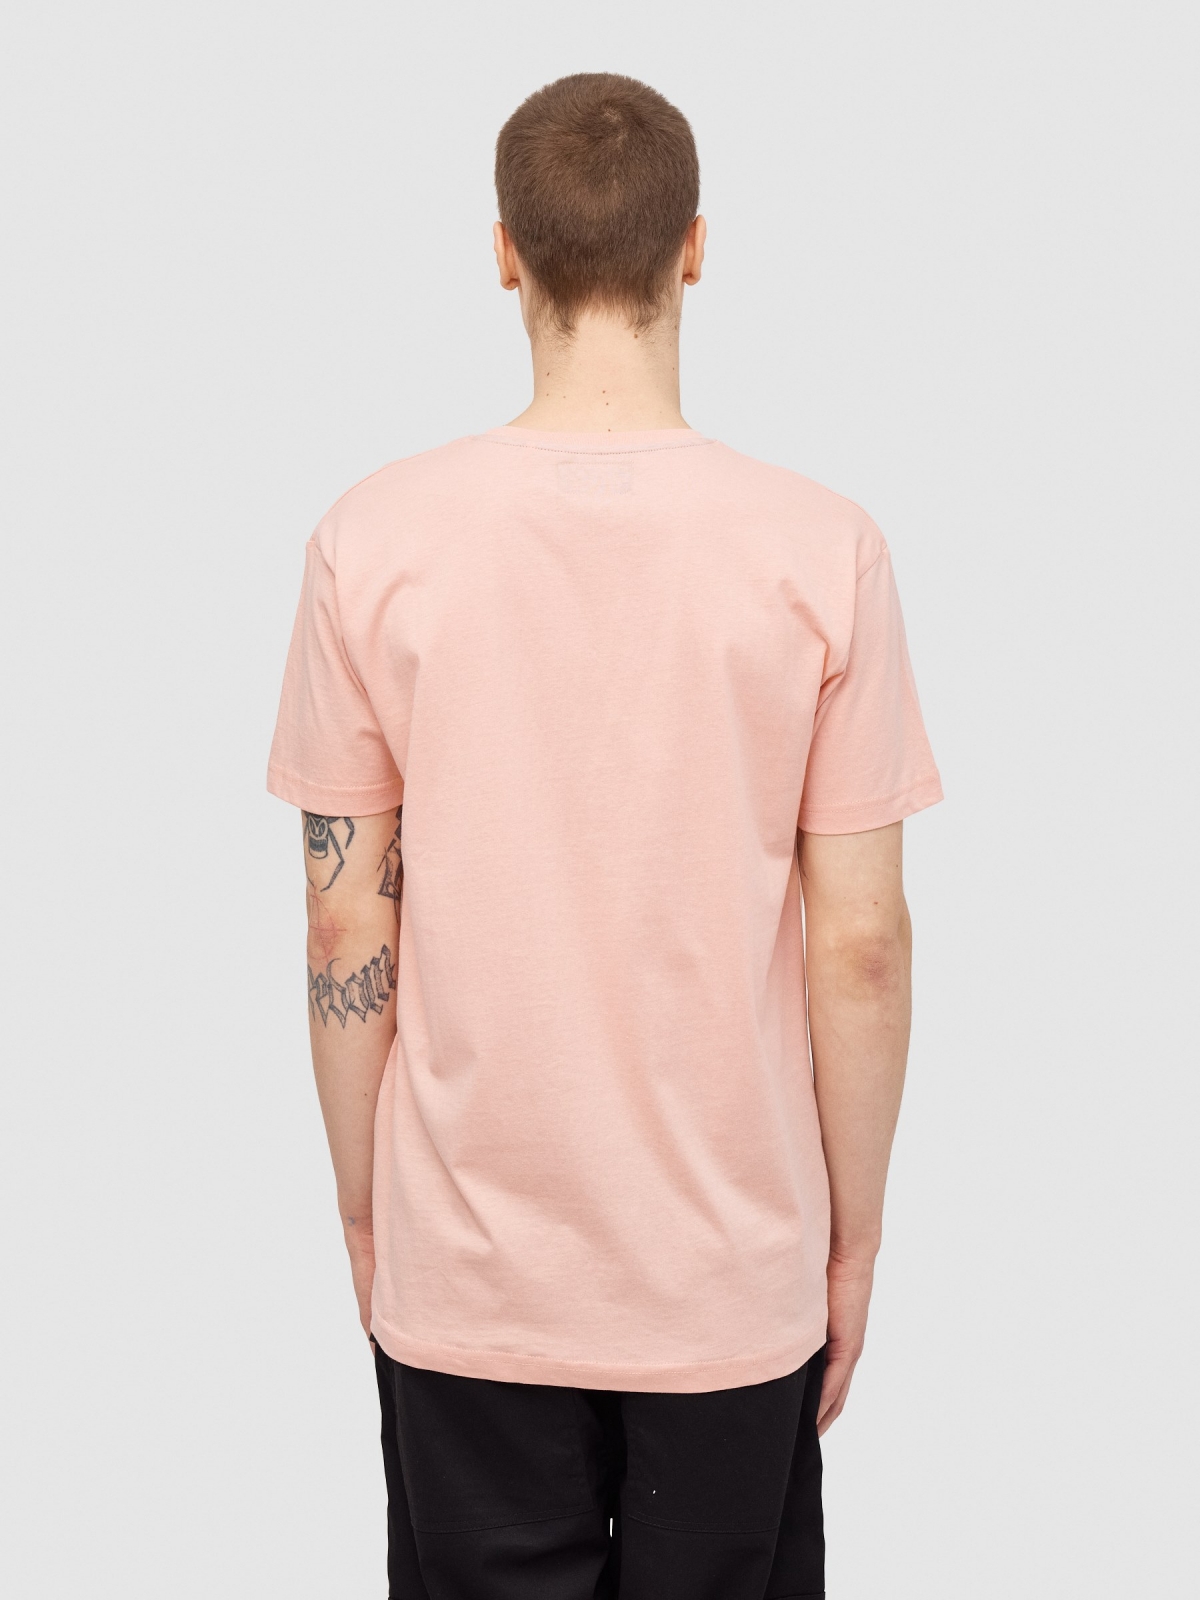 INSIDE urban T-shirt pink middle back view